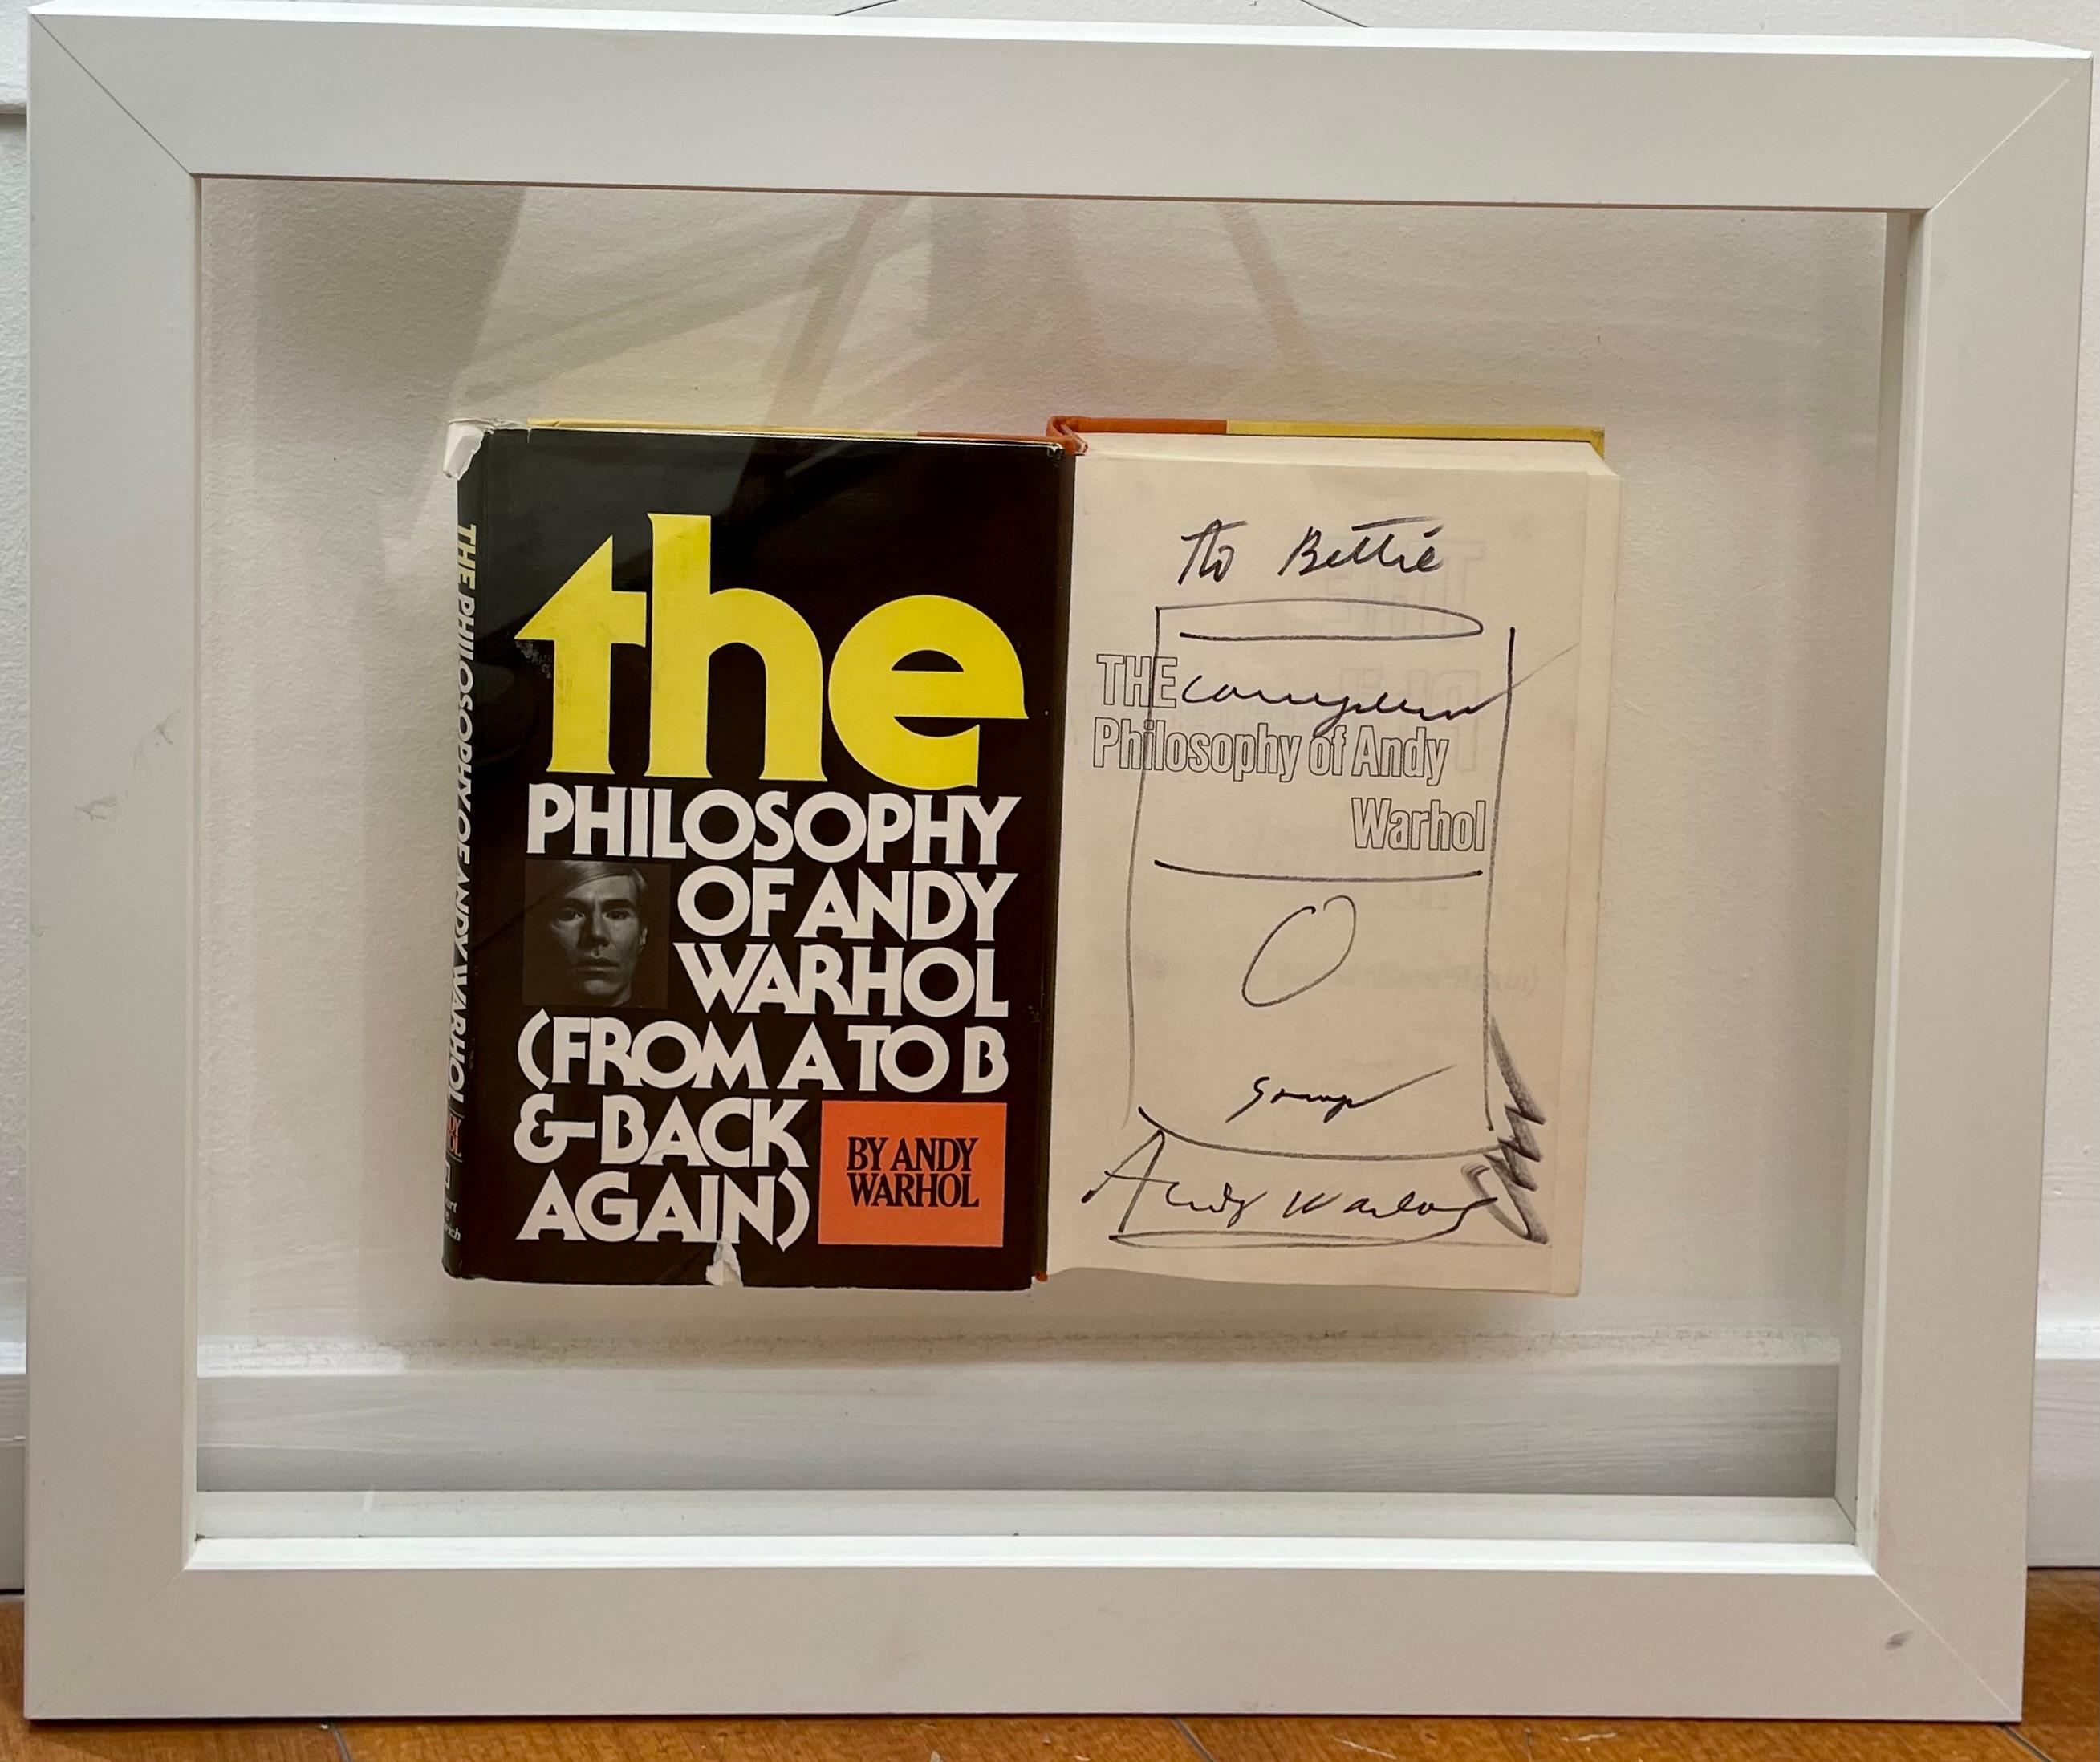 The philosophy of Andy Warhol